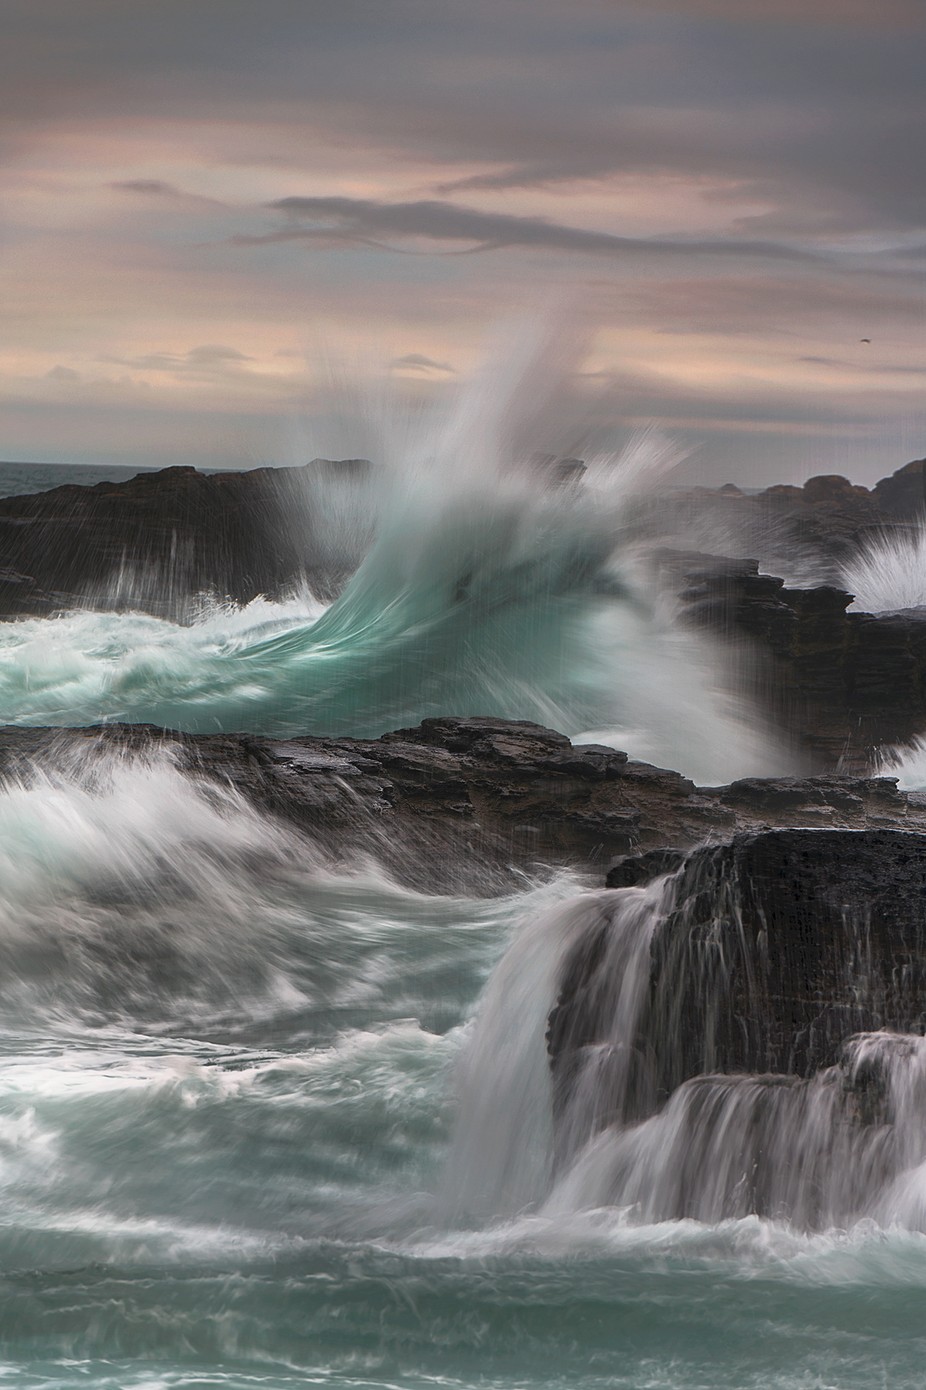 Chaos  by WildSeascapes - The Natural Planet Photo Contest